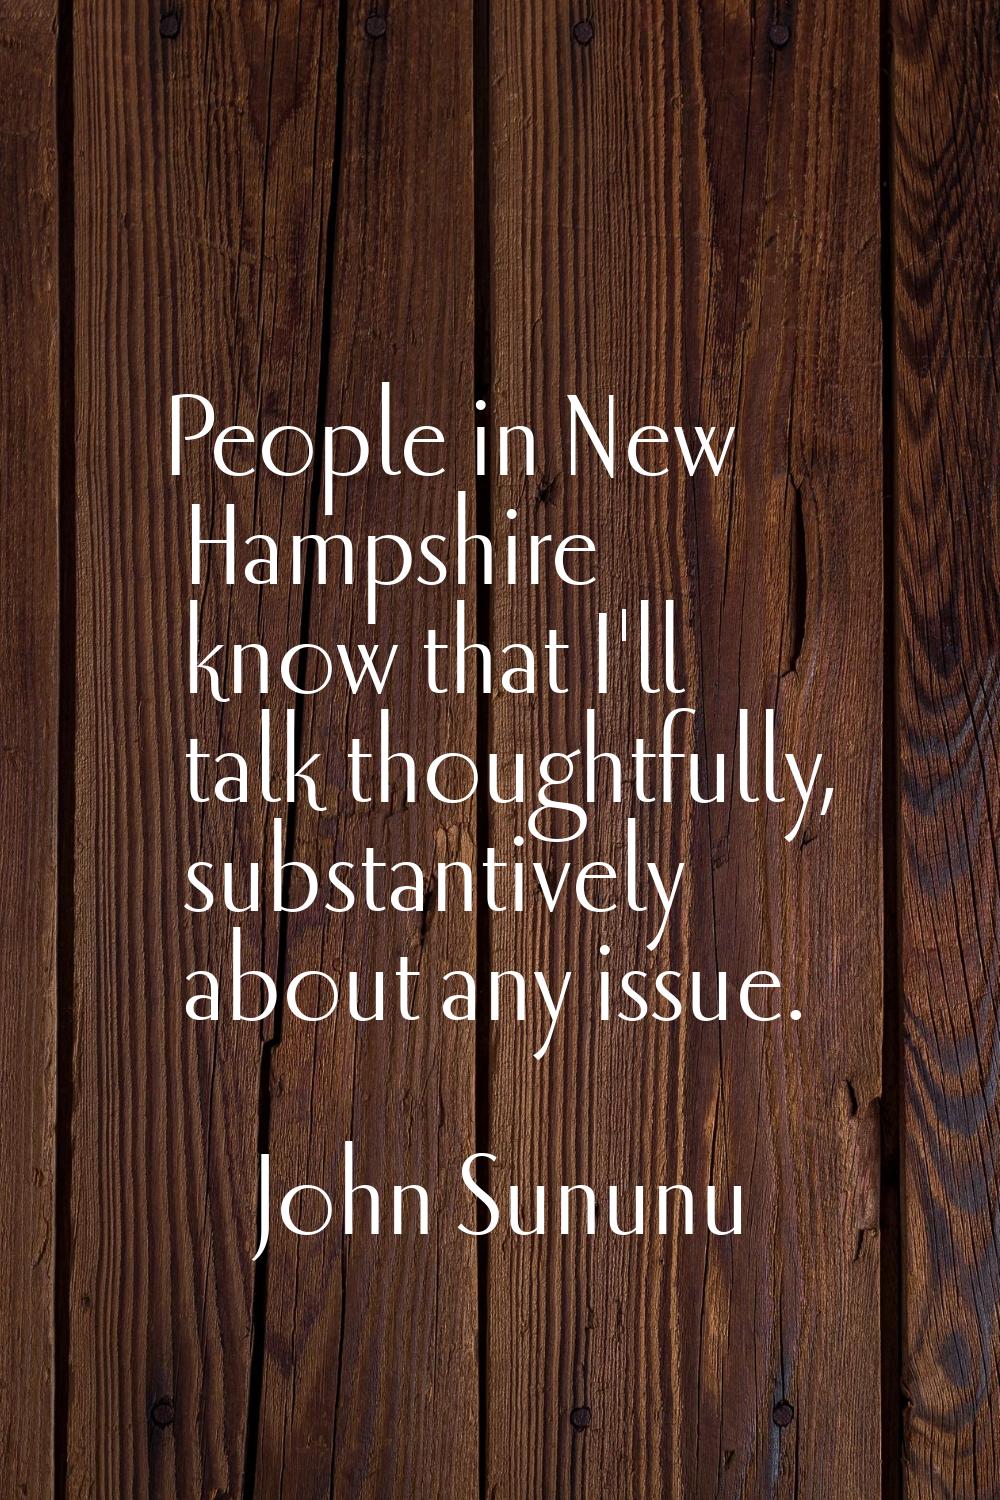 People in New Hampshire know that I'll talk thoughtfully, substantively about any issue.